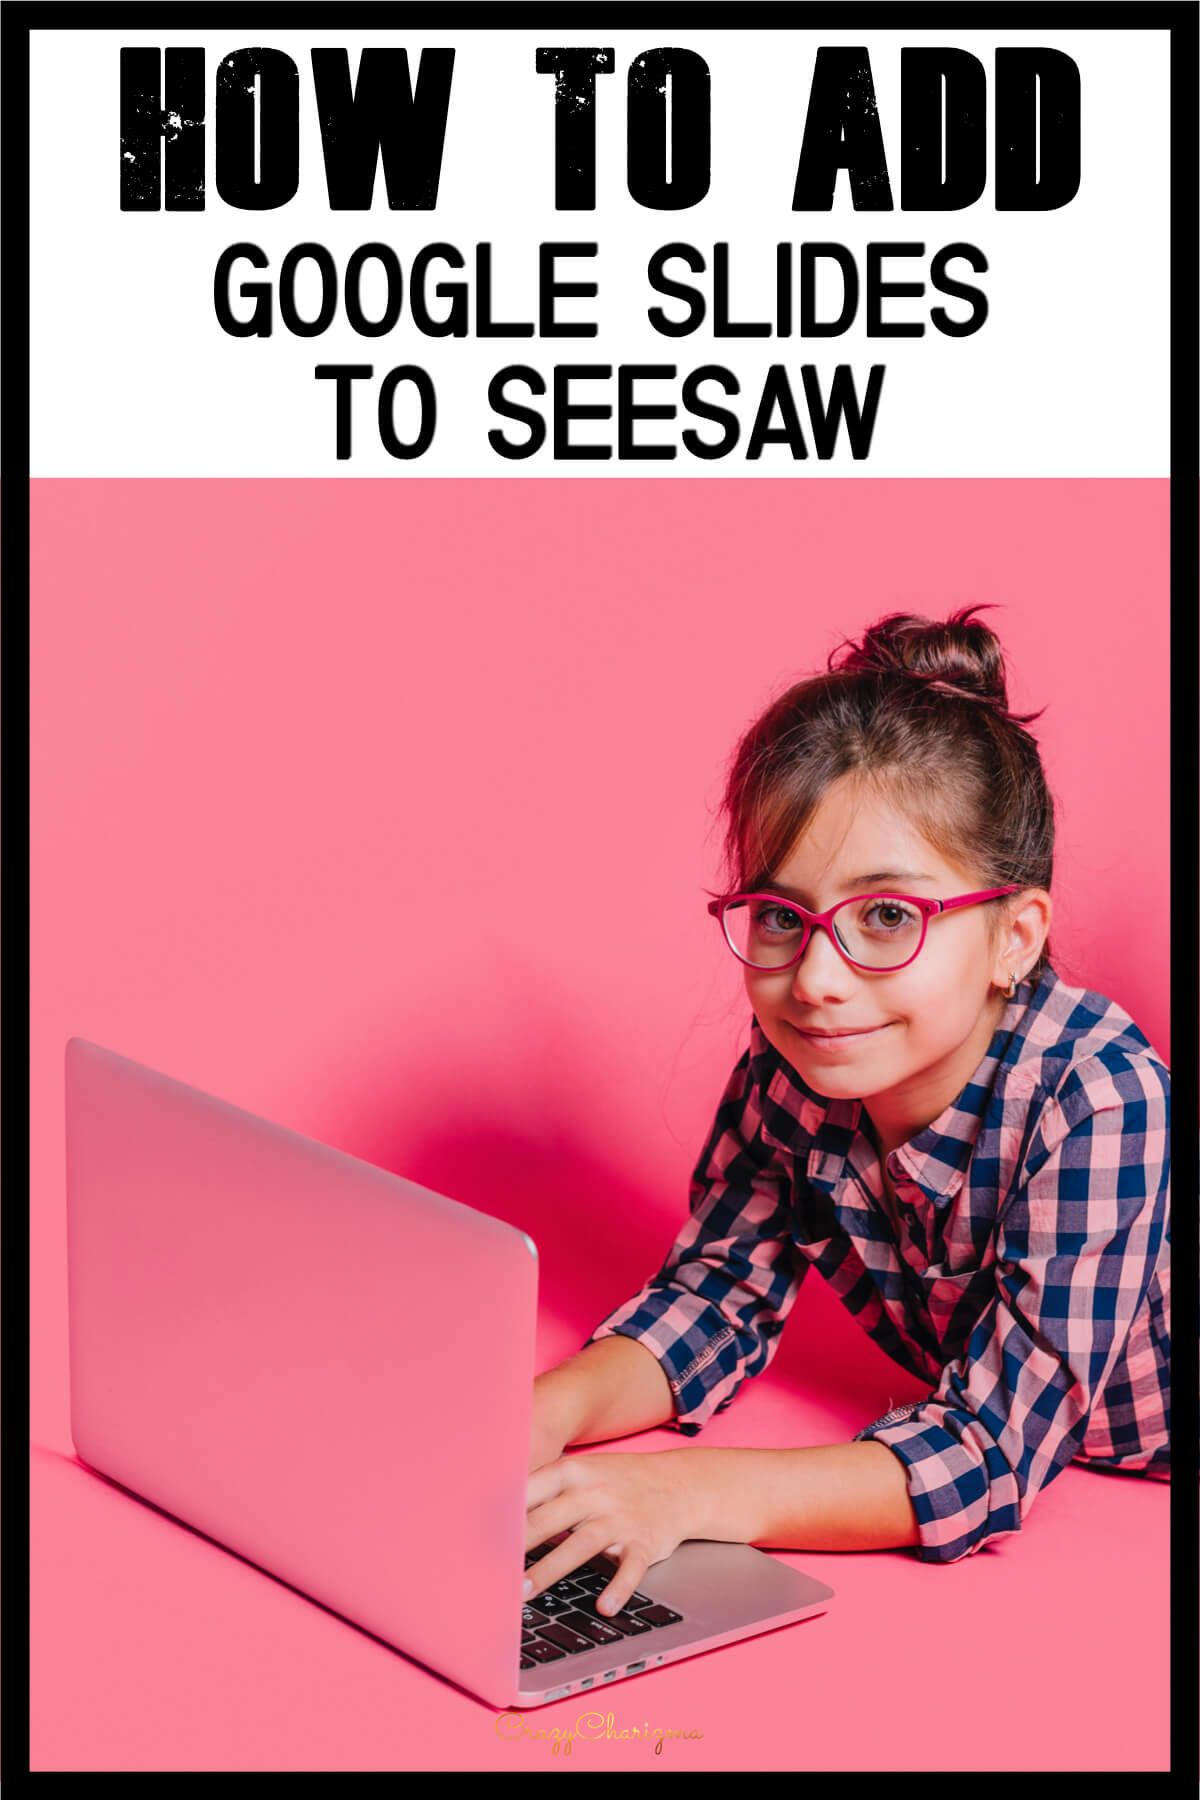 If you need to find all the answers to your questions about Seesaw, you are in the right place! I've put here all the useful information, tips, and tricks about Seesaw!